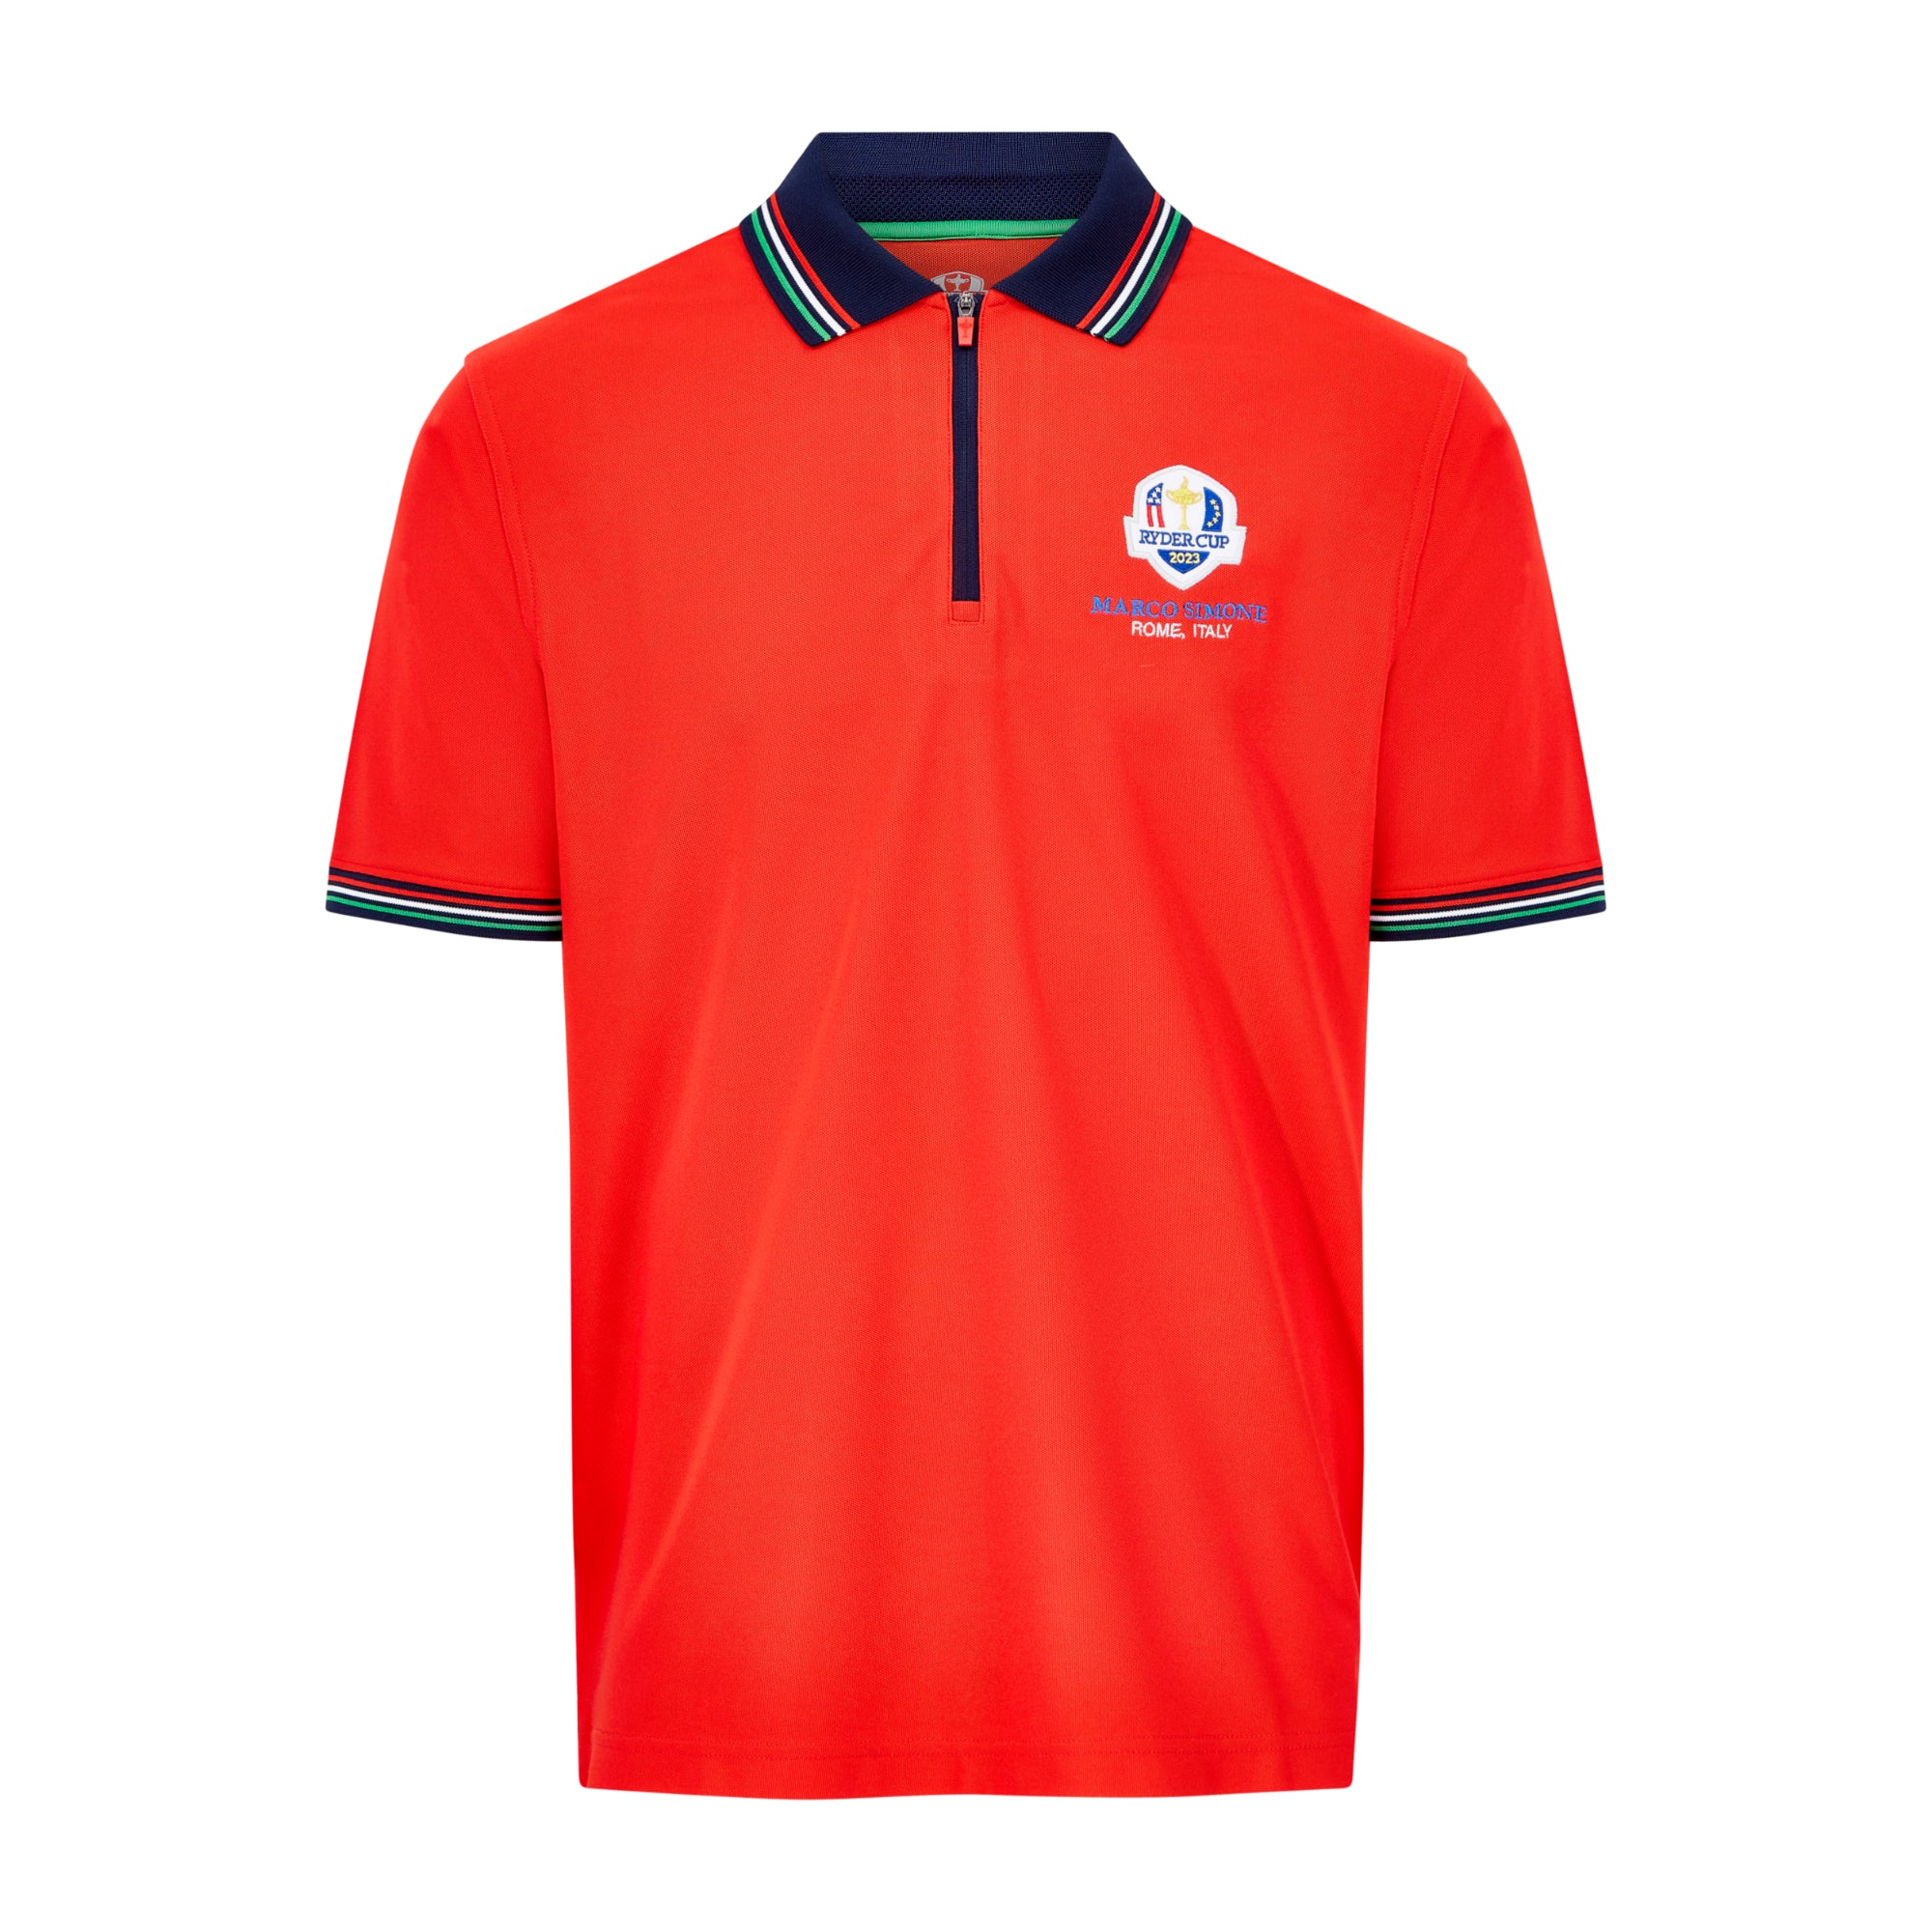 2023 Ryder Cup Rome Collection Men's Tipped Red Polo Shirt Front